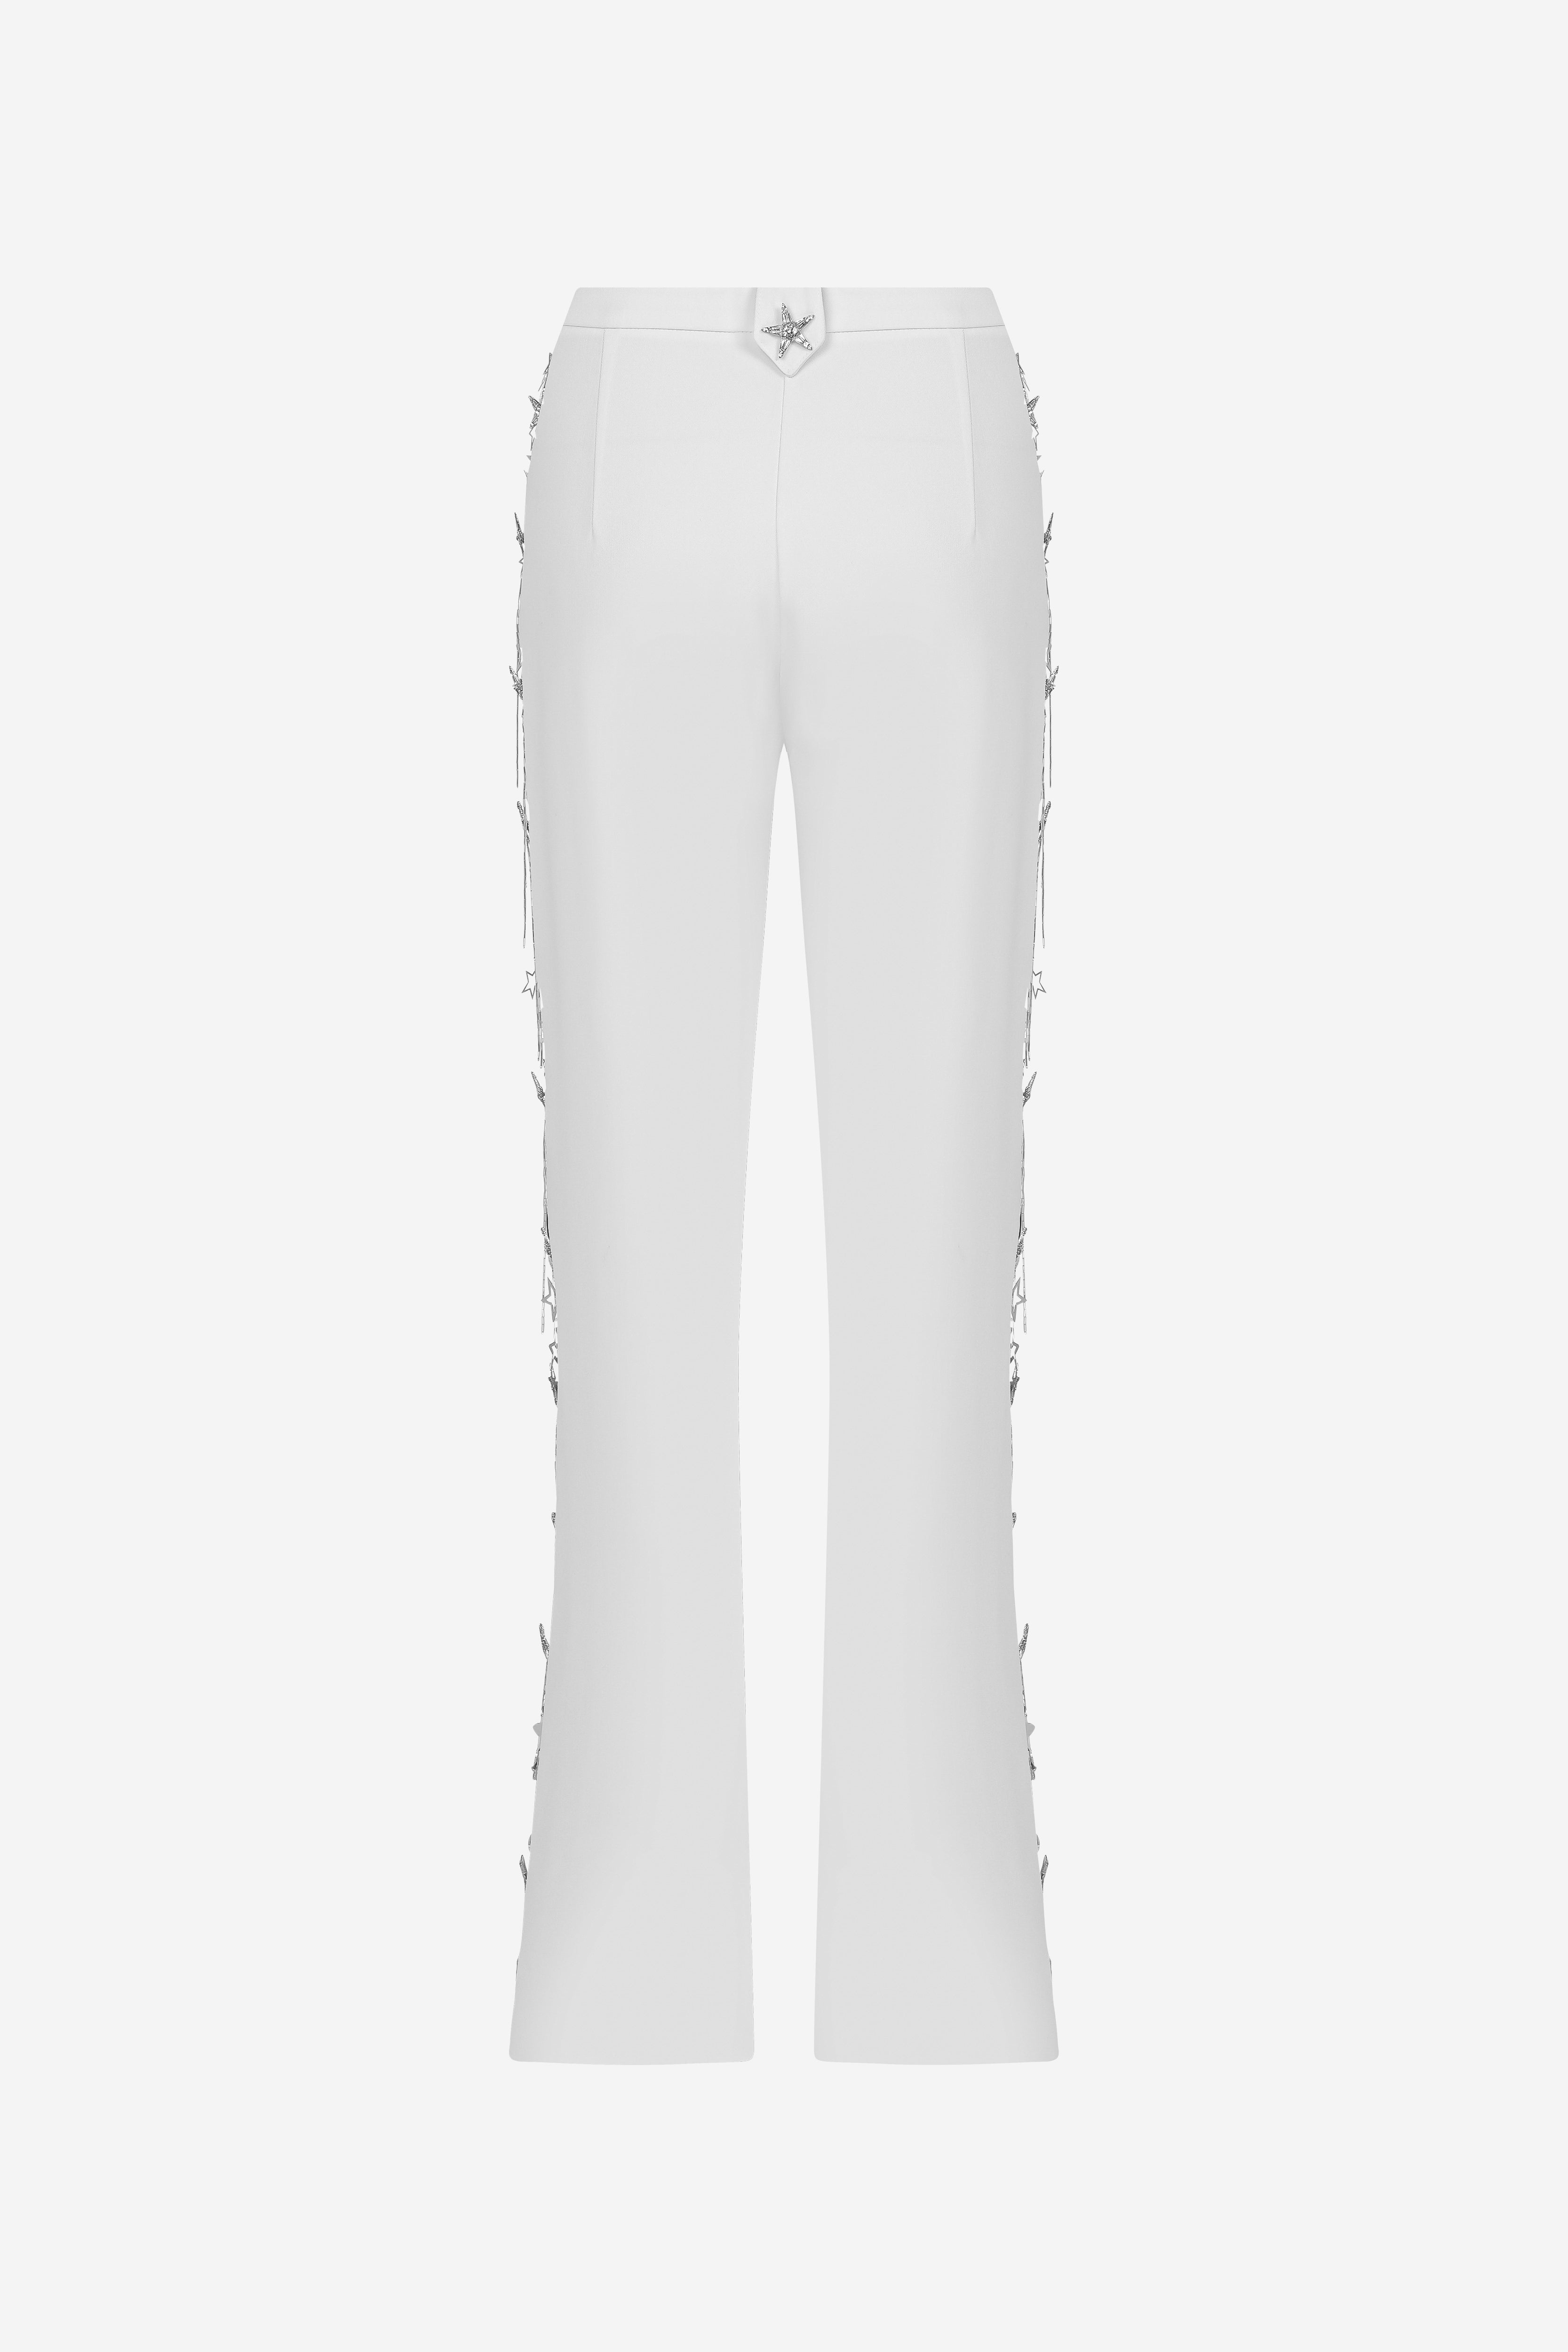 Jupiter - Regular Fit Trouser With Star Accessories